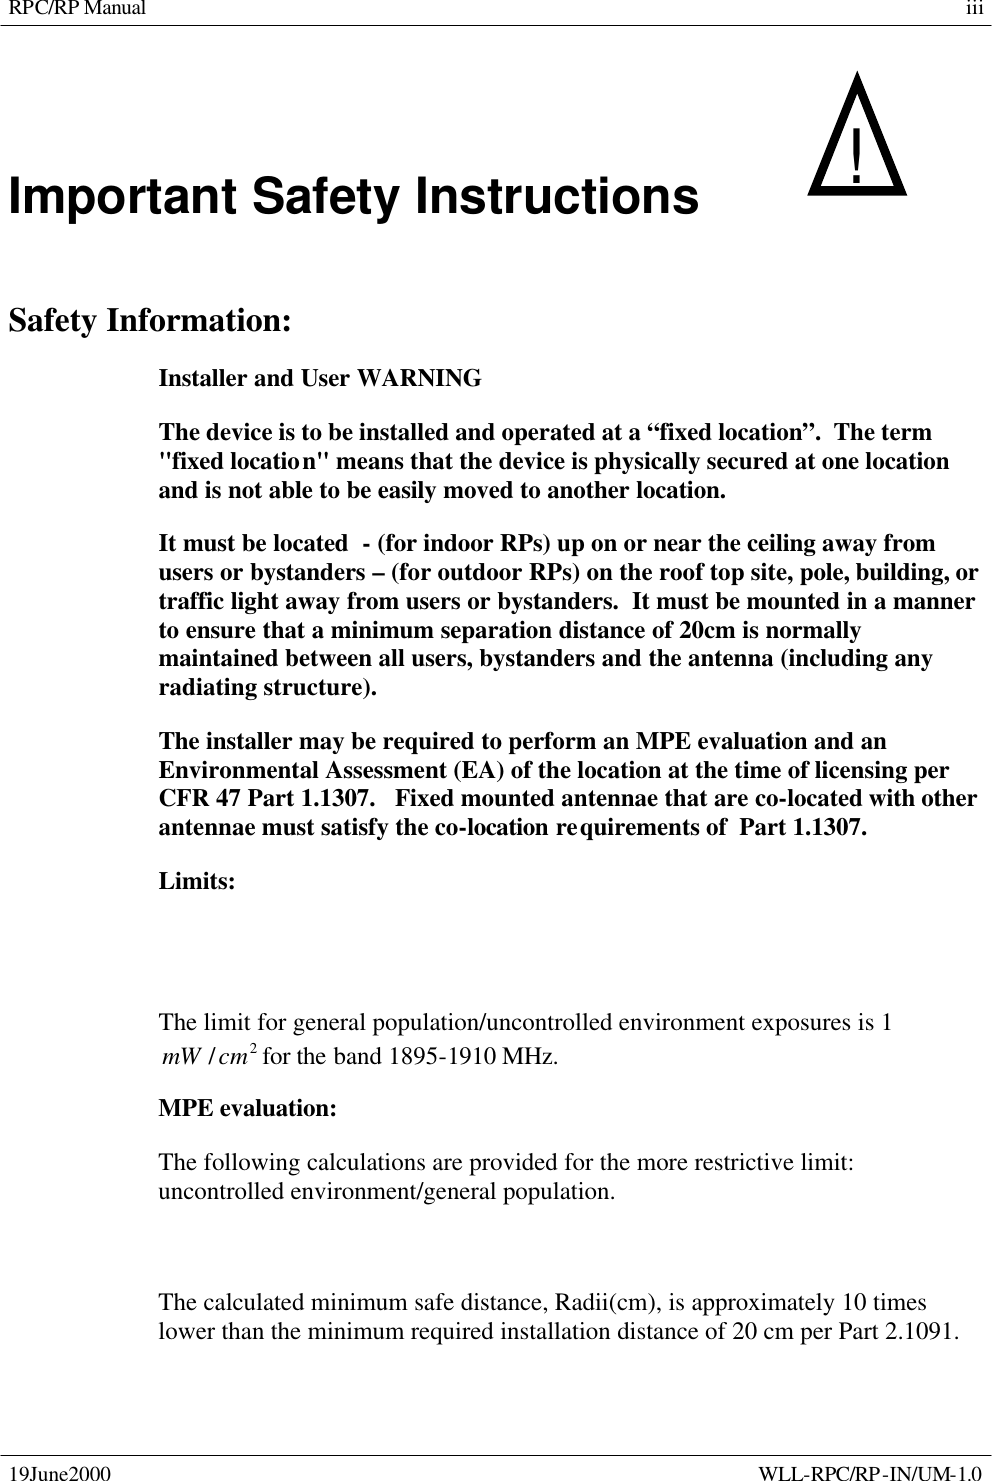 RPC/RP Manual 19June2000    WLL-RPC/RP-IN/UM-1.0 iiiImportant Safety Instructions   !     Safety Information: Installer and User WARNING The device is to be installed and operated at a “fixed location”.  The term &quot;fixed location&quot; means that the device is physically secured at one location and is not able to be easily moved to another location. It must be located  - (for indoor RPs) up on or near the ceiling away from users or bystanders – (for outdoor RPs) on the roof top site, pole, building, or traffic light away from users or bystanders.  It must be mounted in a manner to ensure that a minimum separation distance of 20cm is normally maintained between all users, bystanders and the antenna (including any radiating structure). The installer may be required to perform an MPE evaluation and an Environmental Assessment (EA) of the location at the time of licensing per CFR 47 Part 1.1307.   Fixed mounted antennae that are co-located with other antennae must satisfy the co-location requirements of  Part 1.1307. Limits: The limit for general population/uncontrolled environment exposures is 1 2/cmmW for the band 1895-1910 MHz. MPE evaluation: The following calculations are provided for the more restrictive limit: uncontrolled environment/general population.    The calculated minimum safe distance, Radii(cm), is approximately 10 times lower than the minimum required installation distance of 20 cm per Part 2.1091. 